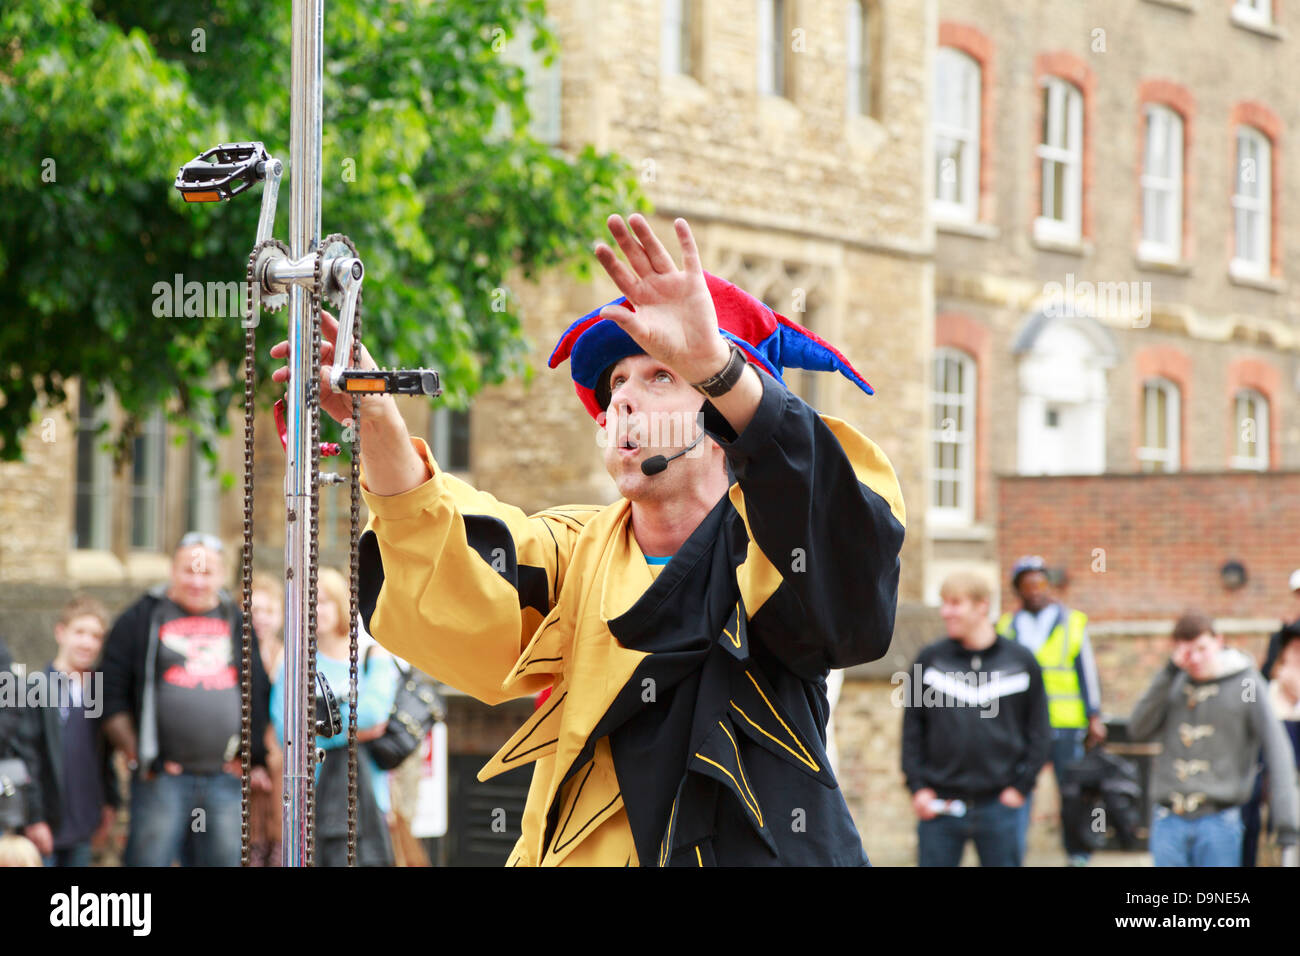 Jester attempting to ride a tall unicycle, Peterborough Heritage Festival 22 June 2013, England Stock Photo